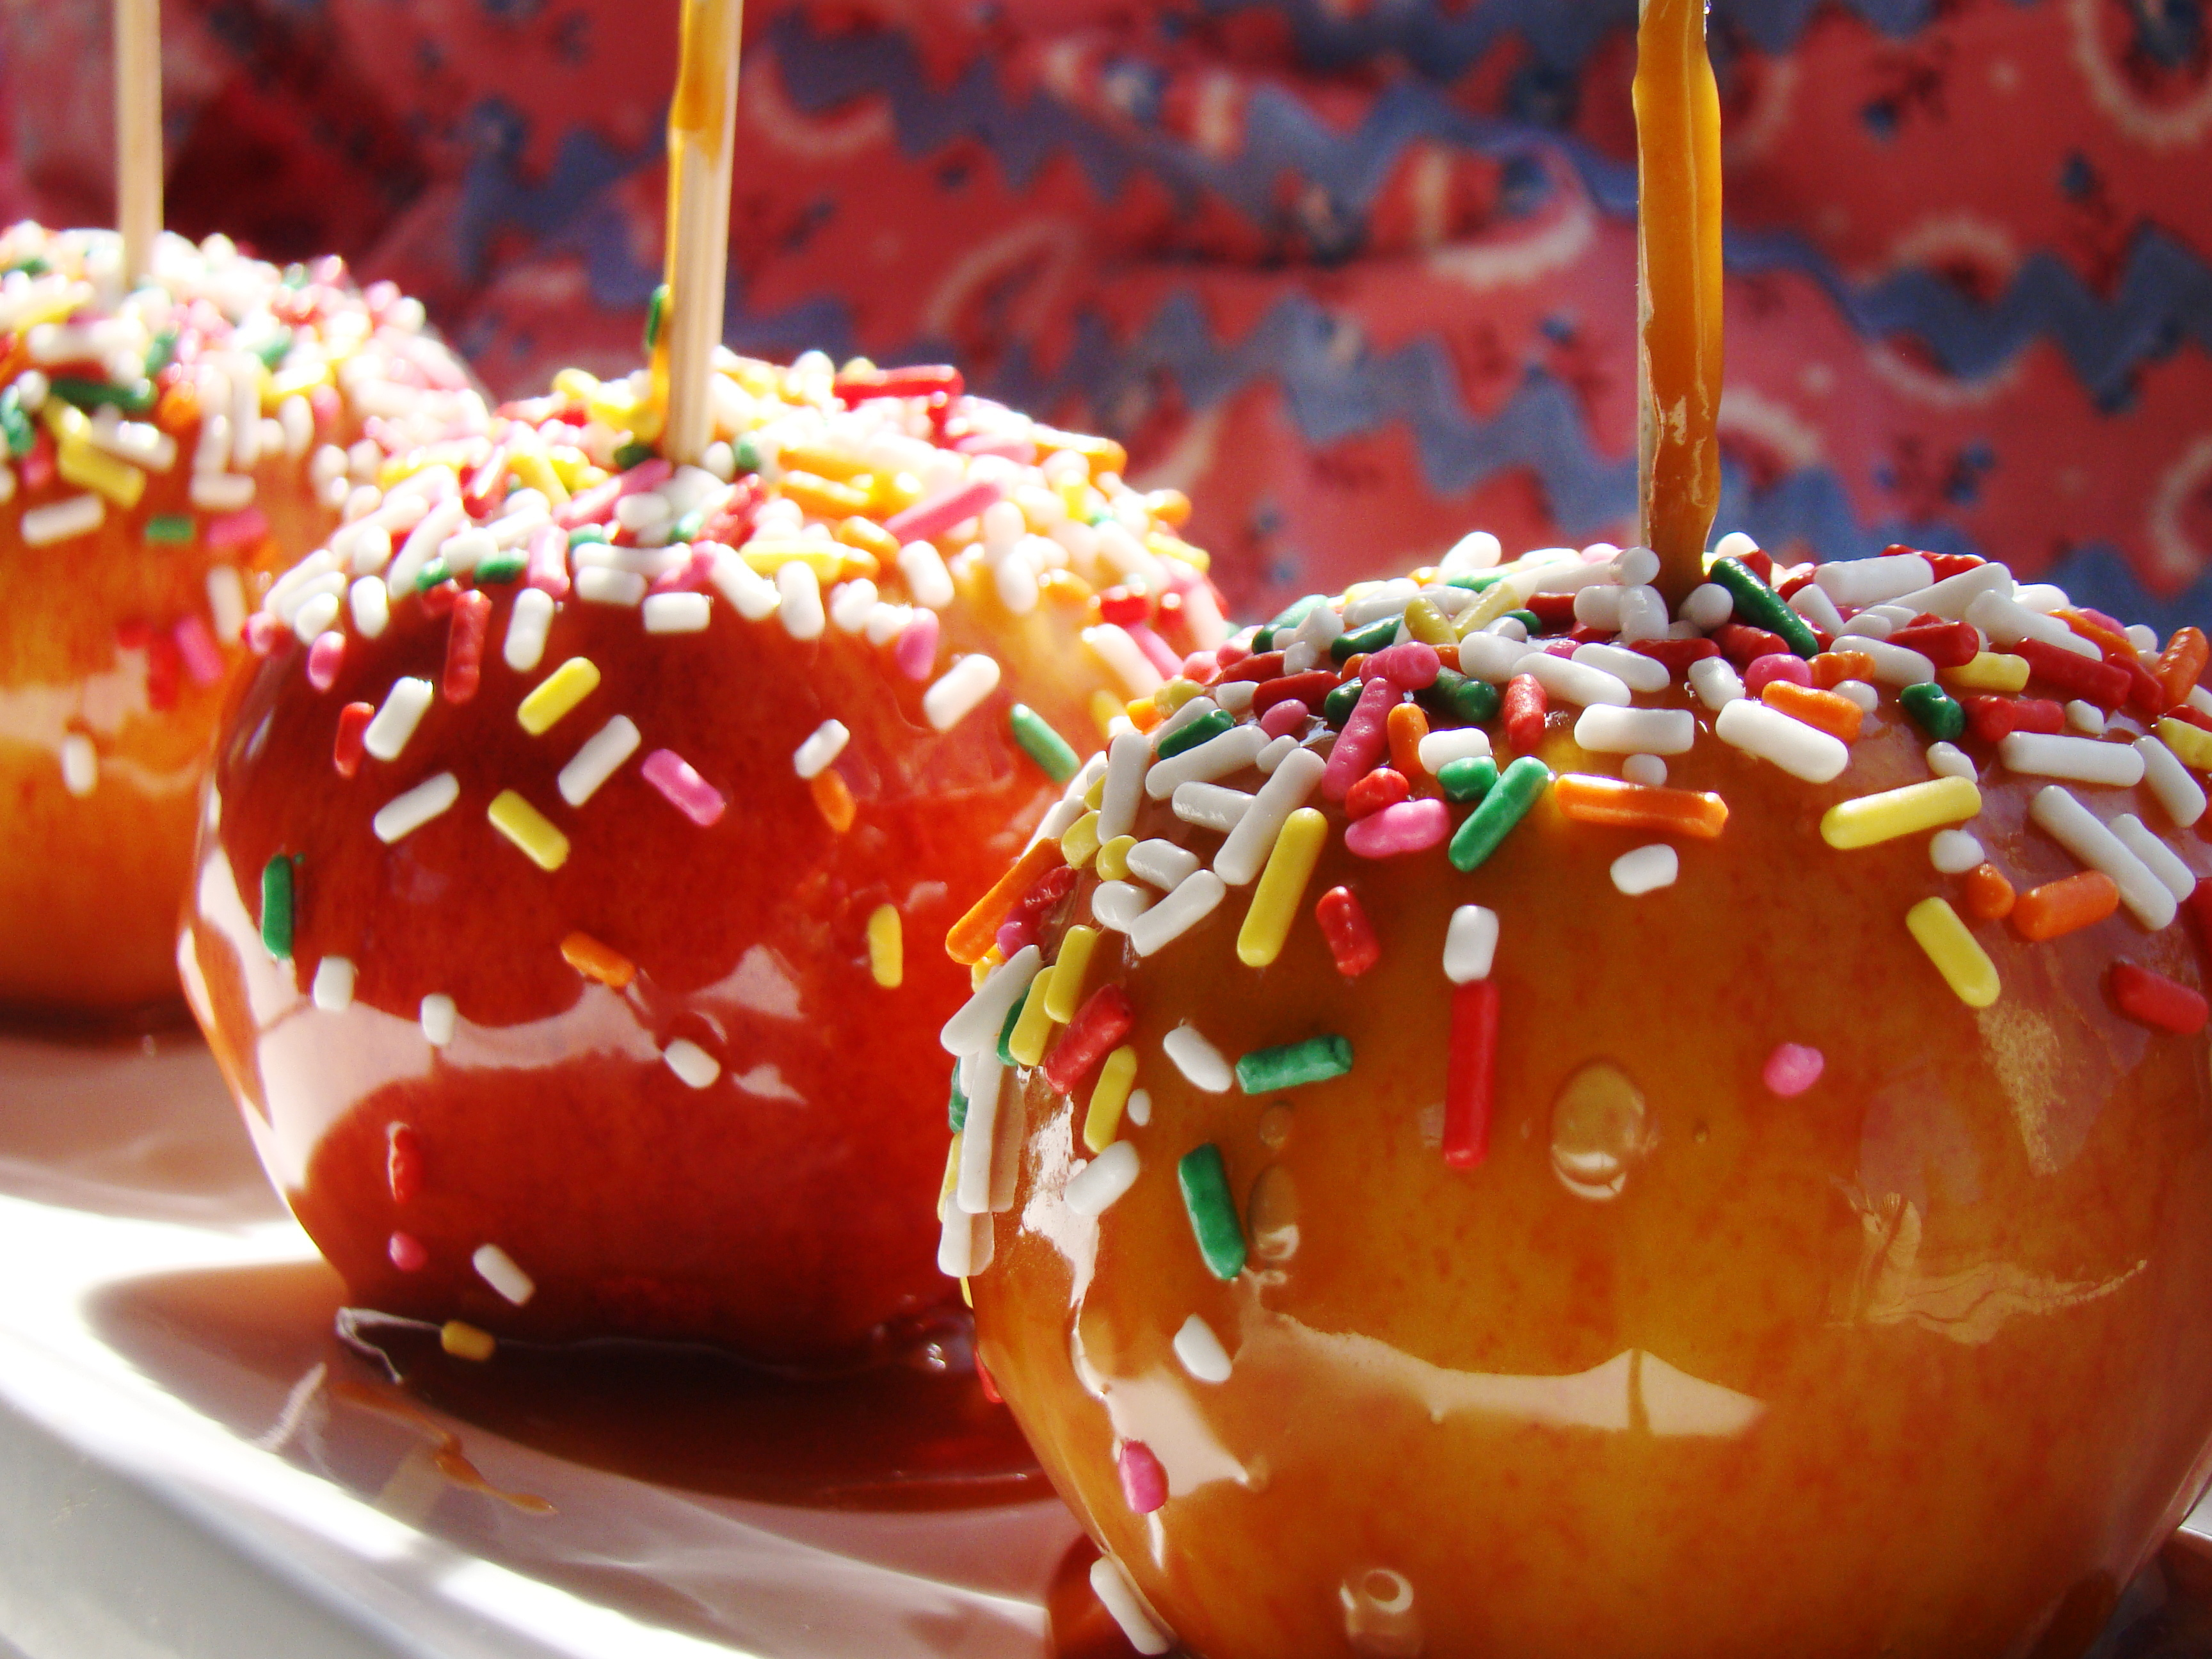 <p>Always a hit when fall arrives, you can add sprinkles and other toppings if so inclined. <a href="http://www.kraftrecipes.com/recipes/caramel-dipped-apples-55497.aspx">Try this Kraft Recipes version.</a></p>